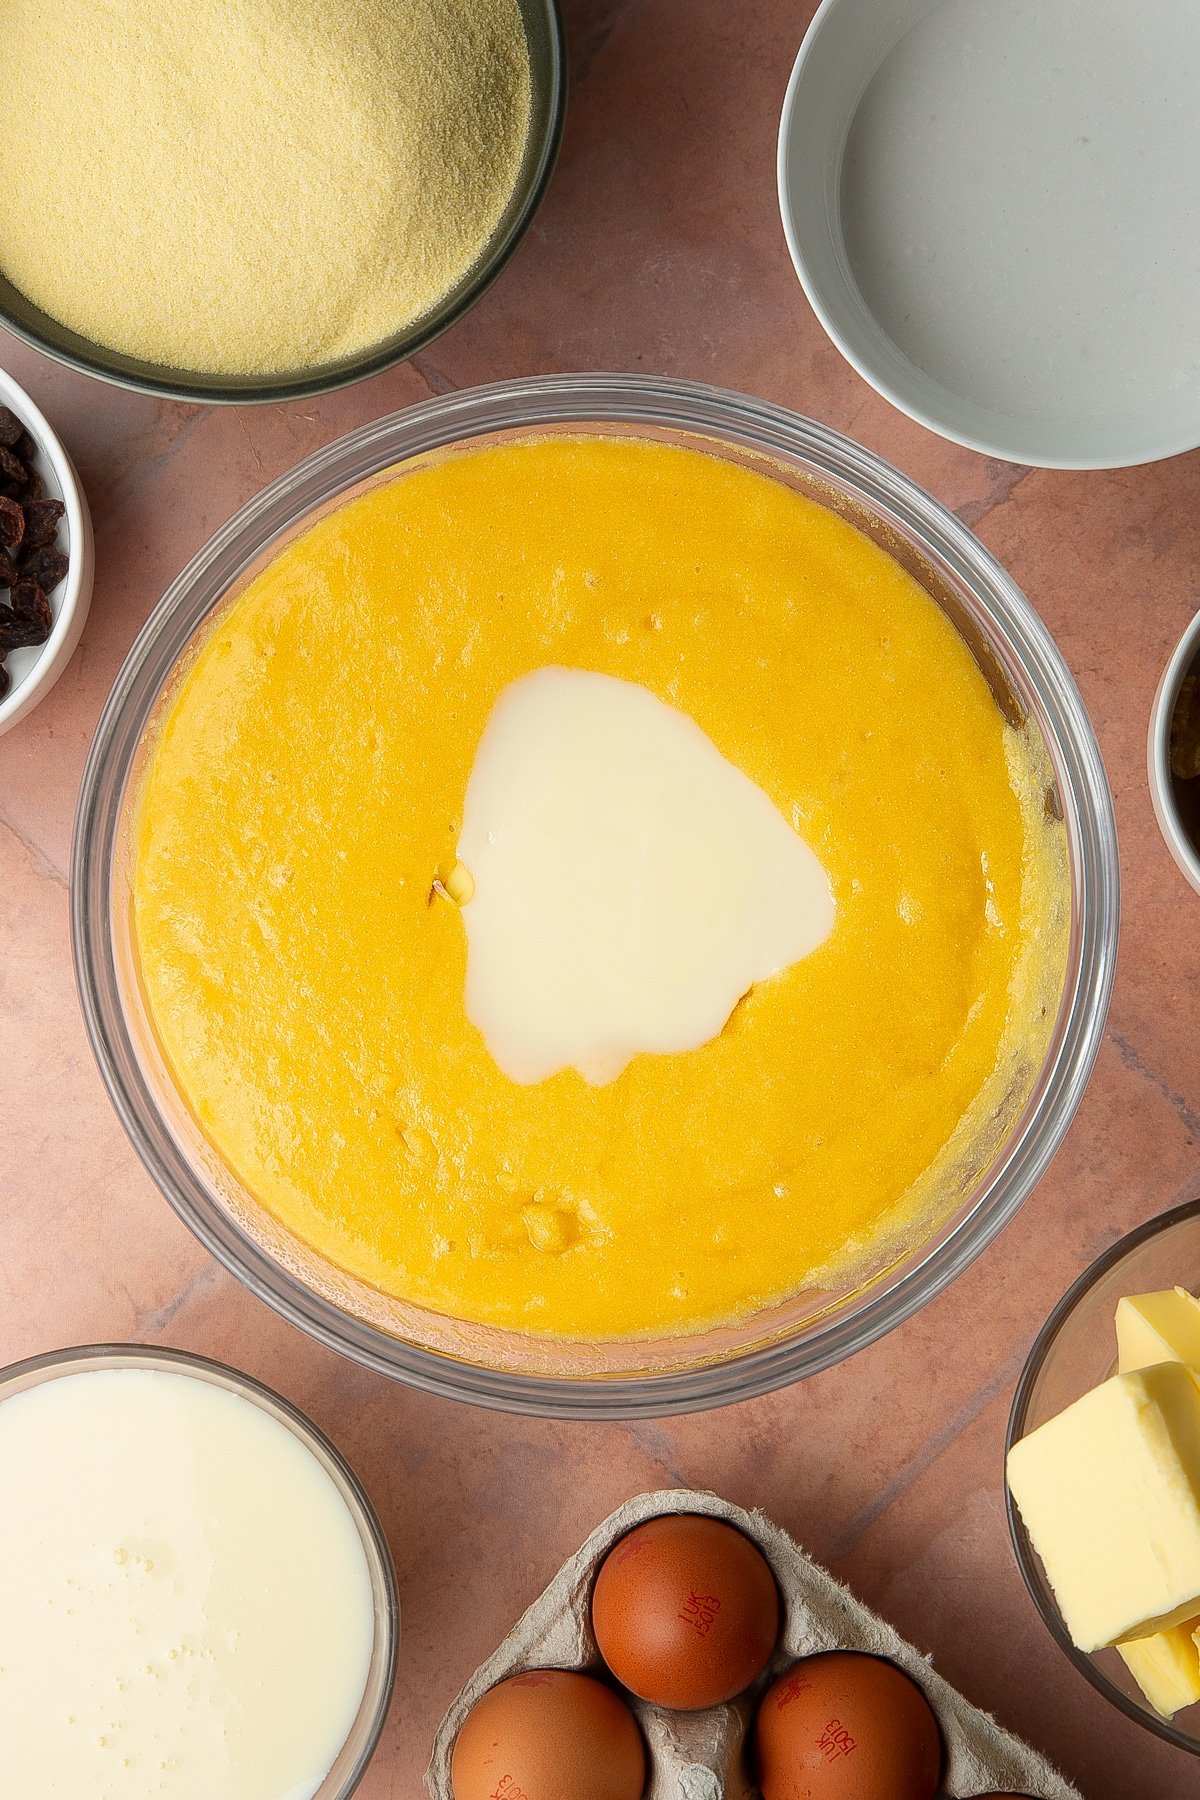 Semolina, sugar, eggs and melted butter and golden syrup mixed together in a bowl with condensed milk on top. Ingredients to make sanwin-makin surround the bowl.